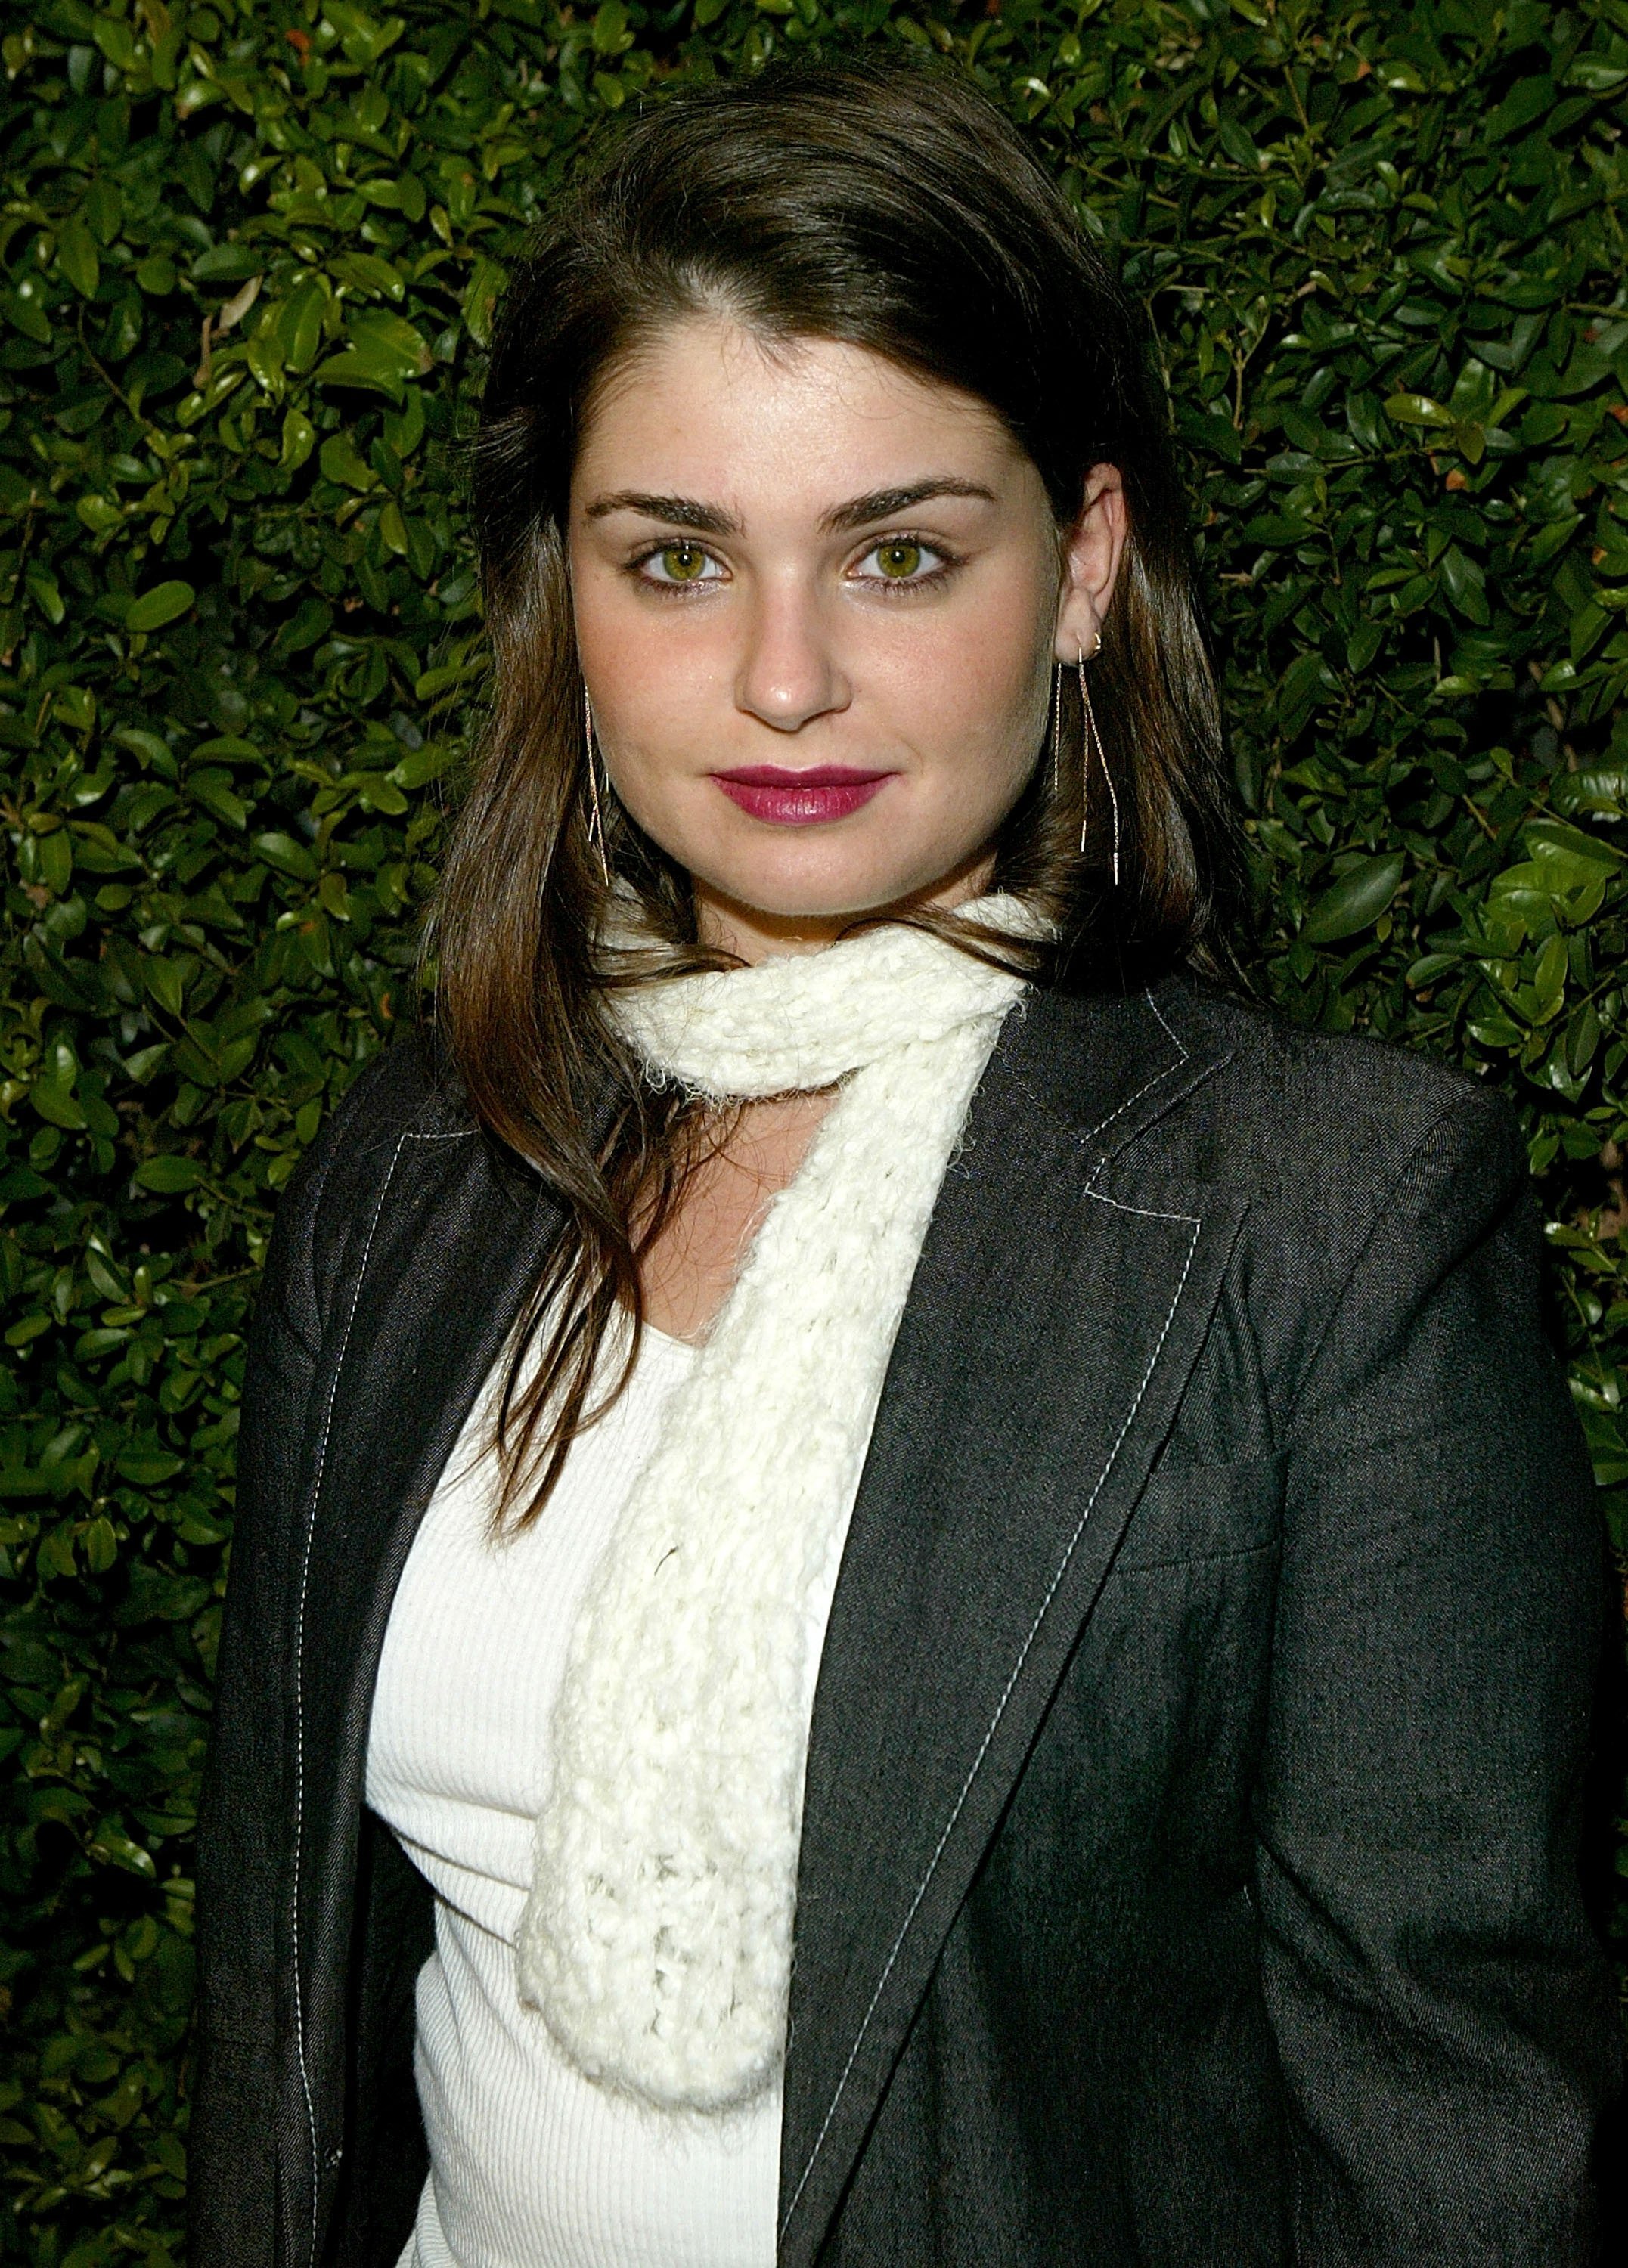 Aimee Osbourne attends the opening of the Stella McCartney store in Beverly Hills, California on September 28, 2003 | Photo: Getty Images